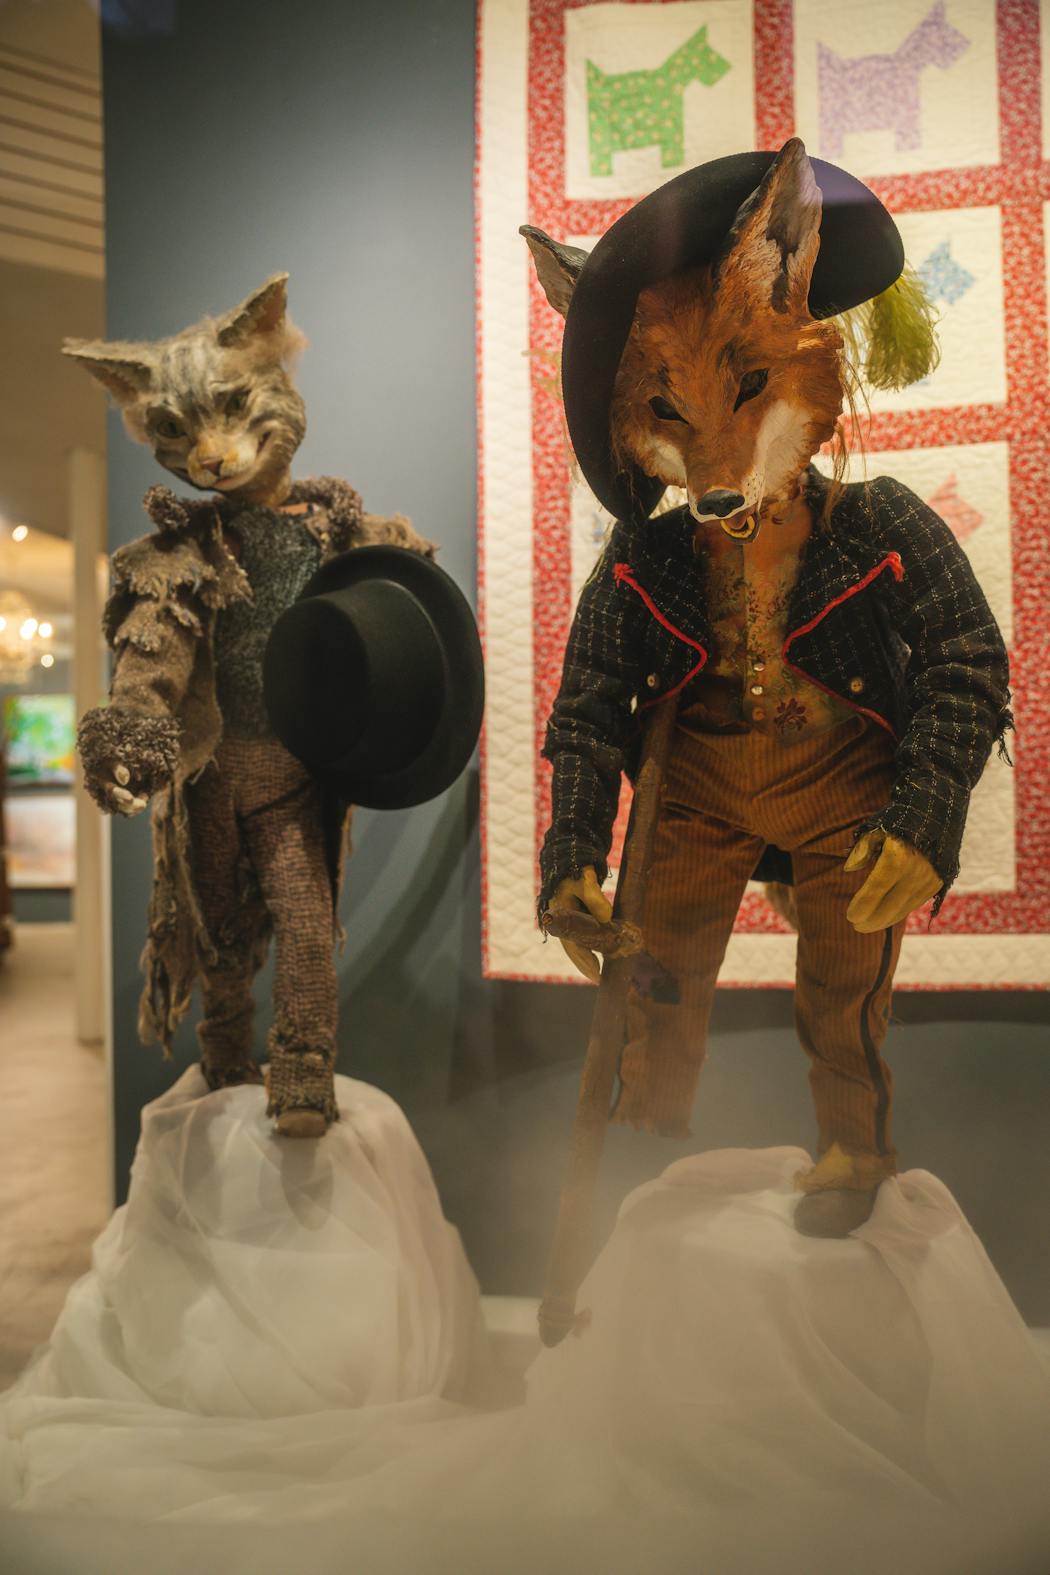 The fox and cat characters from Dayton’s 1991 “Pinocchio” display.